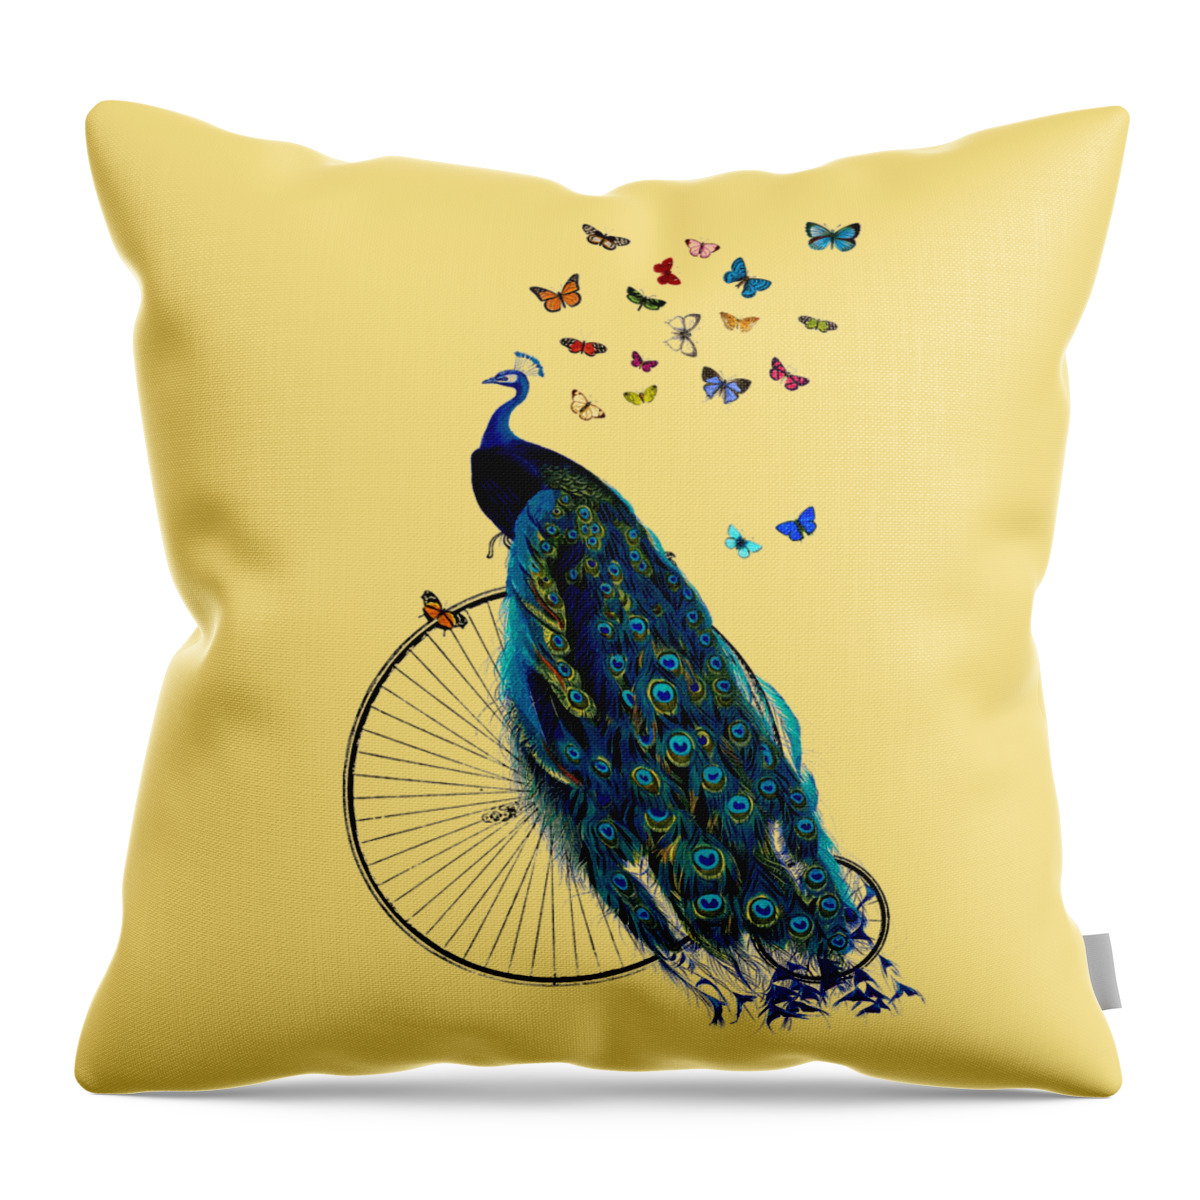 Peacock Throw Pillow featuring the digital art Decorative peacock on bicycle with butterflies by Madame Memento